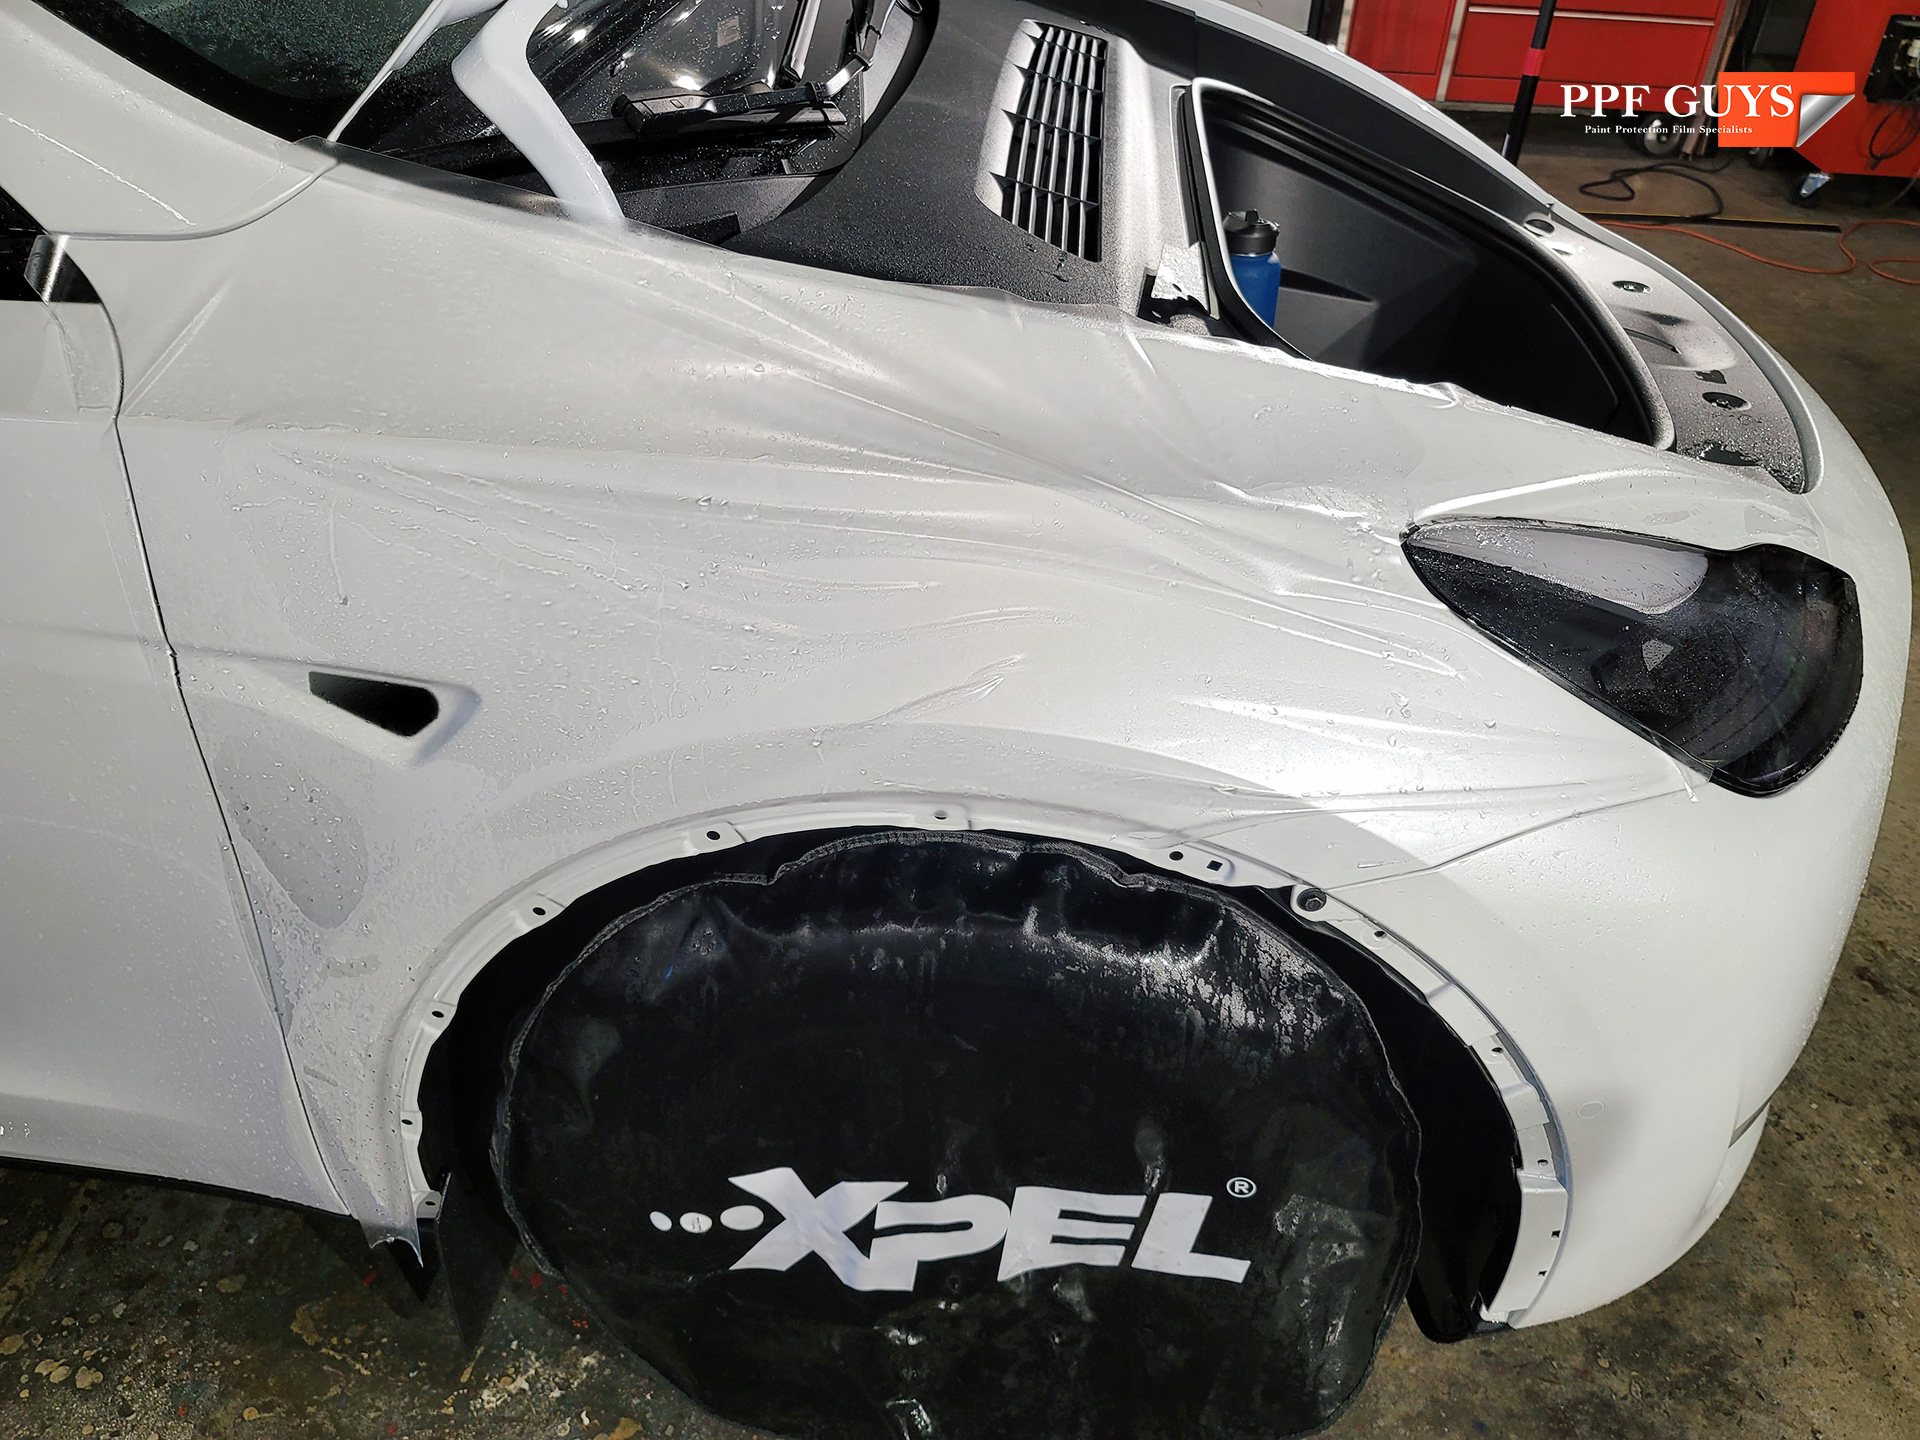 PPF Guys Model Y White Xpel Stealth, ceramic, painted emblems (10).jpg